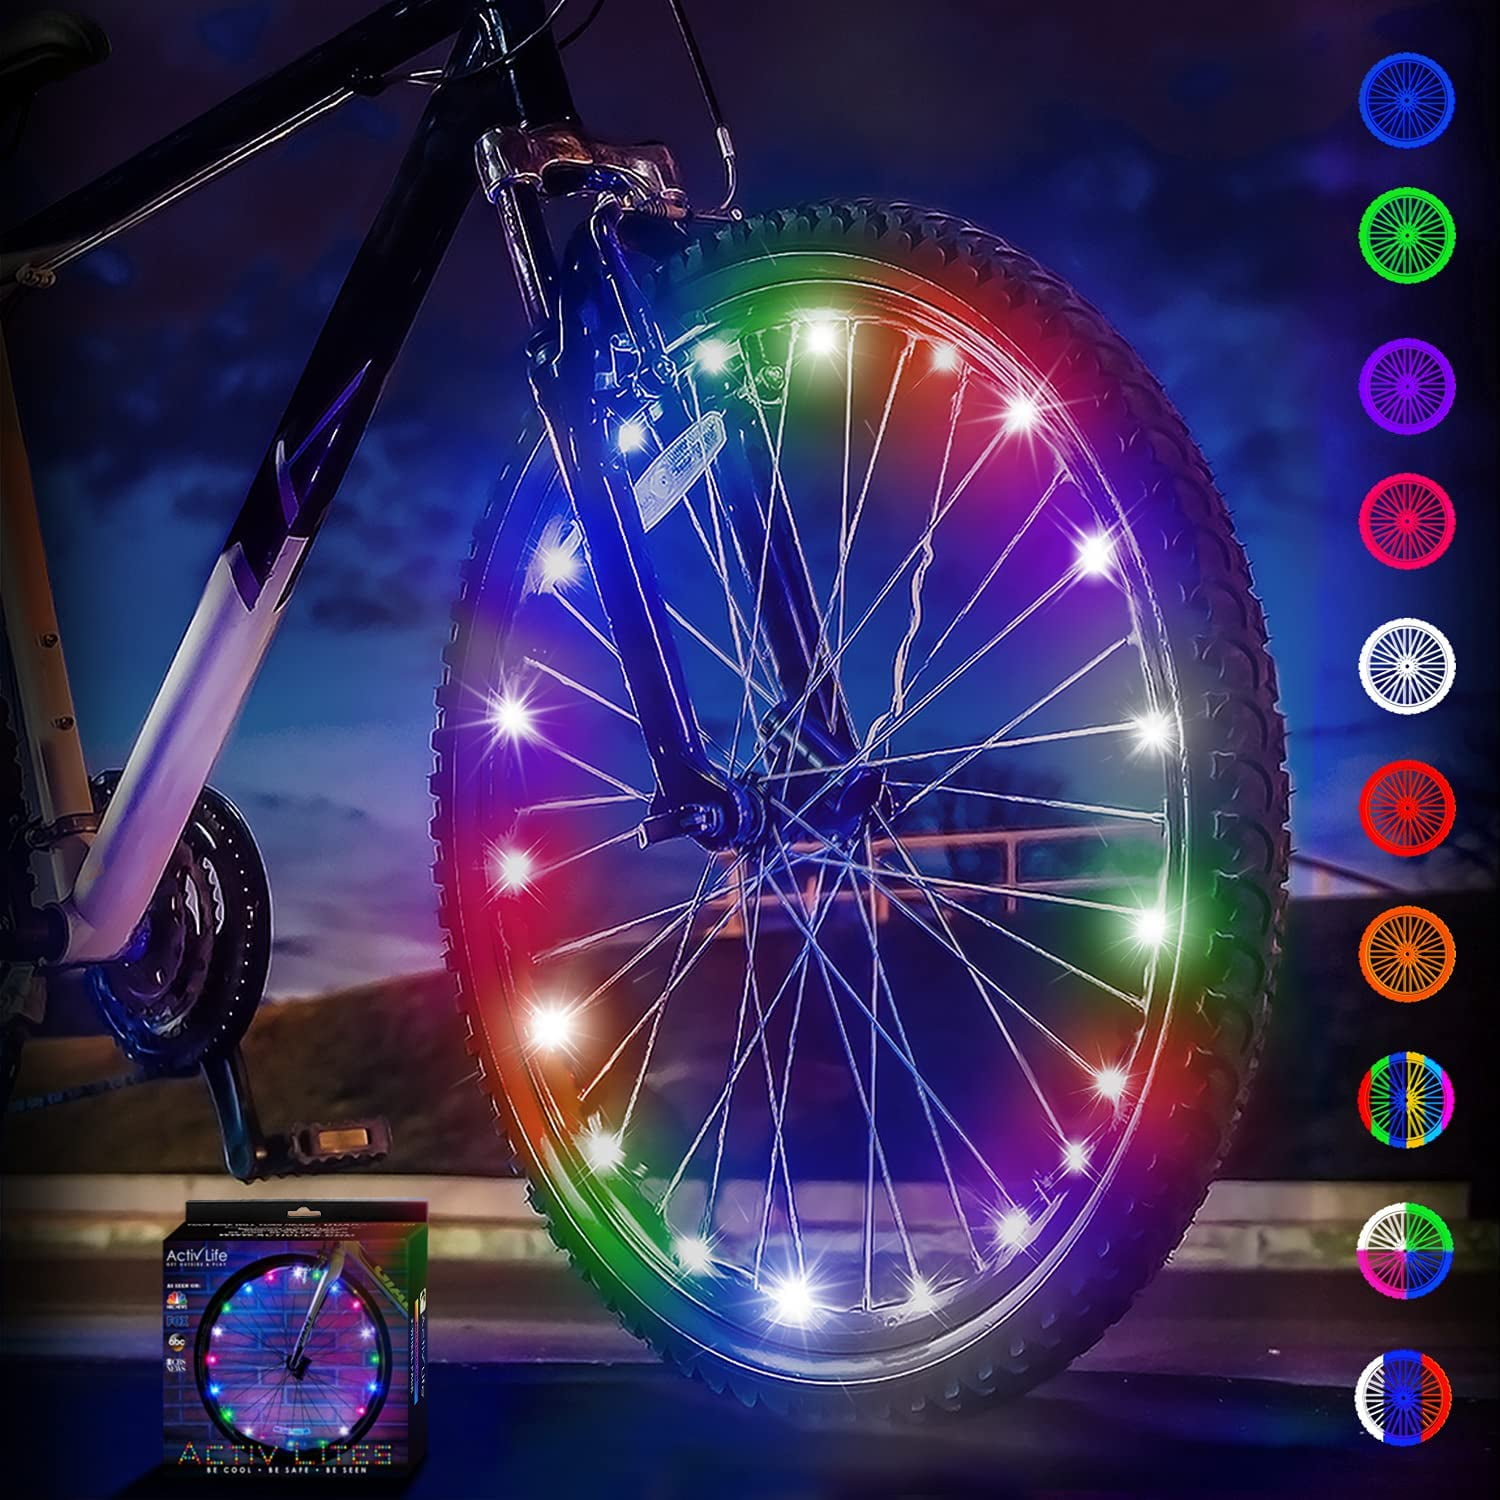 XIAOLUO LED Bike Wheel Lights with Batteries Included! Get 100% ...